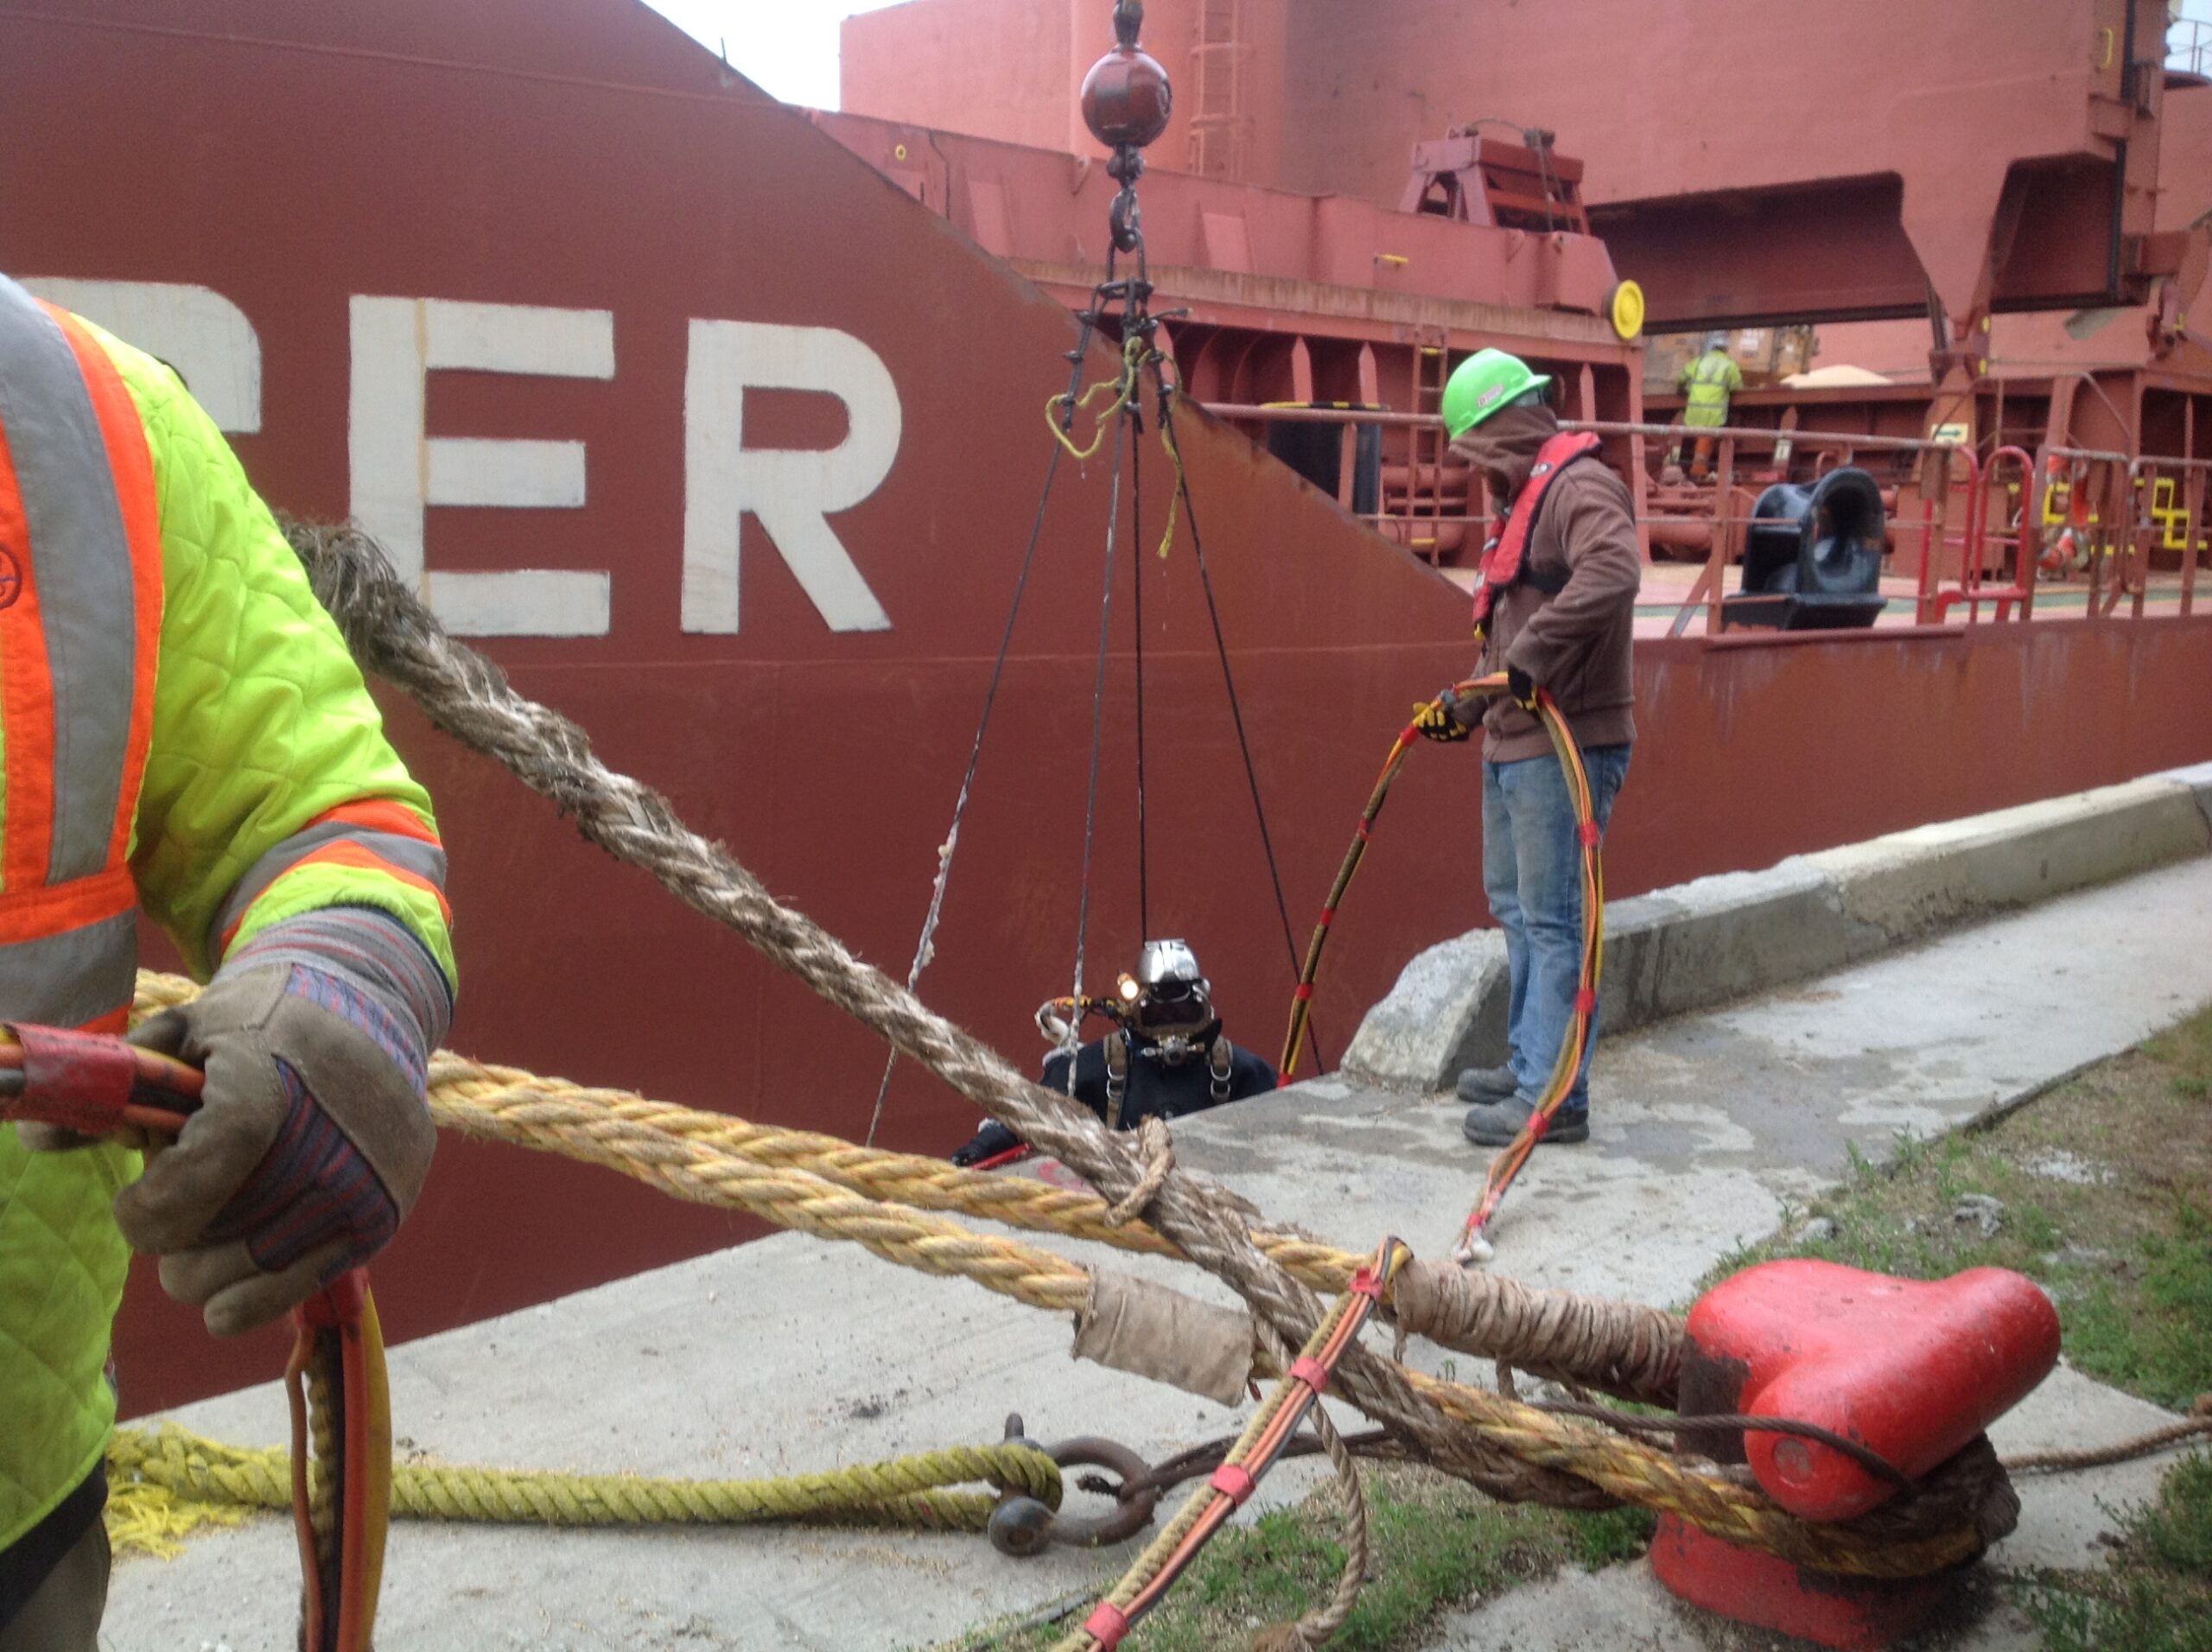 Diver preparing to carry out a repair on a ship's hull.